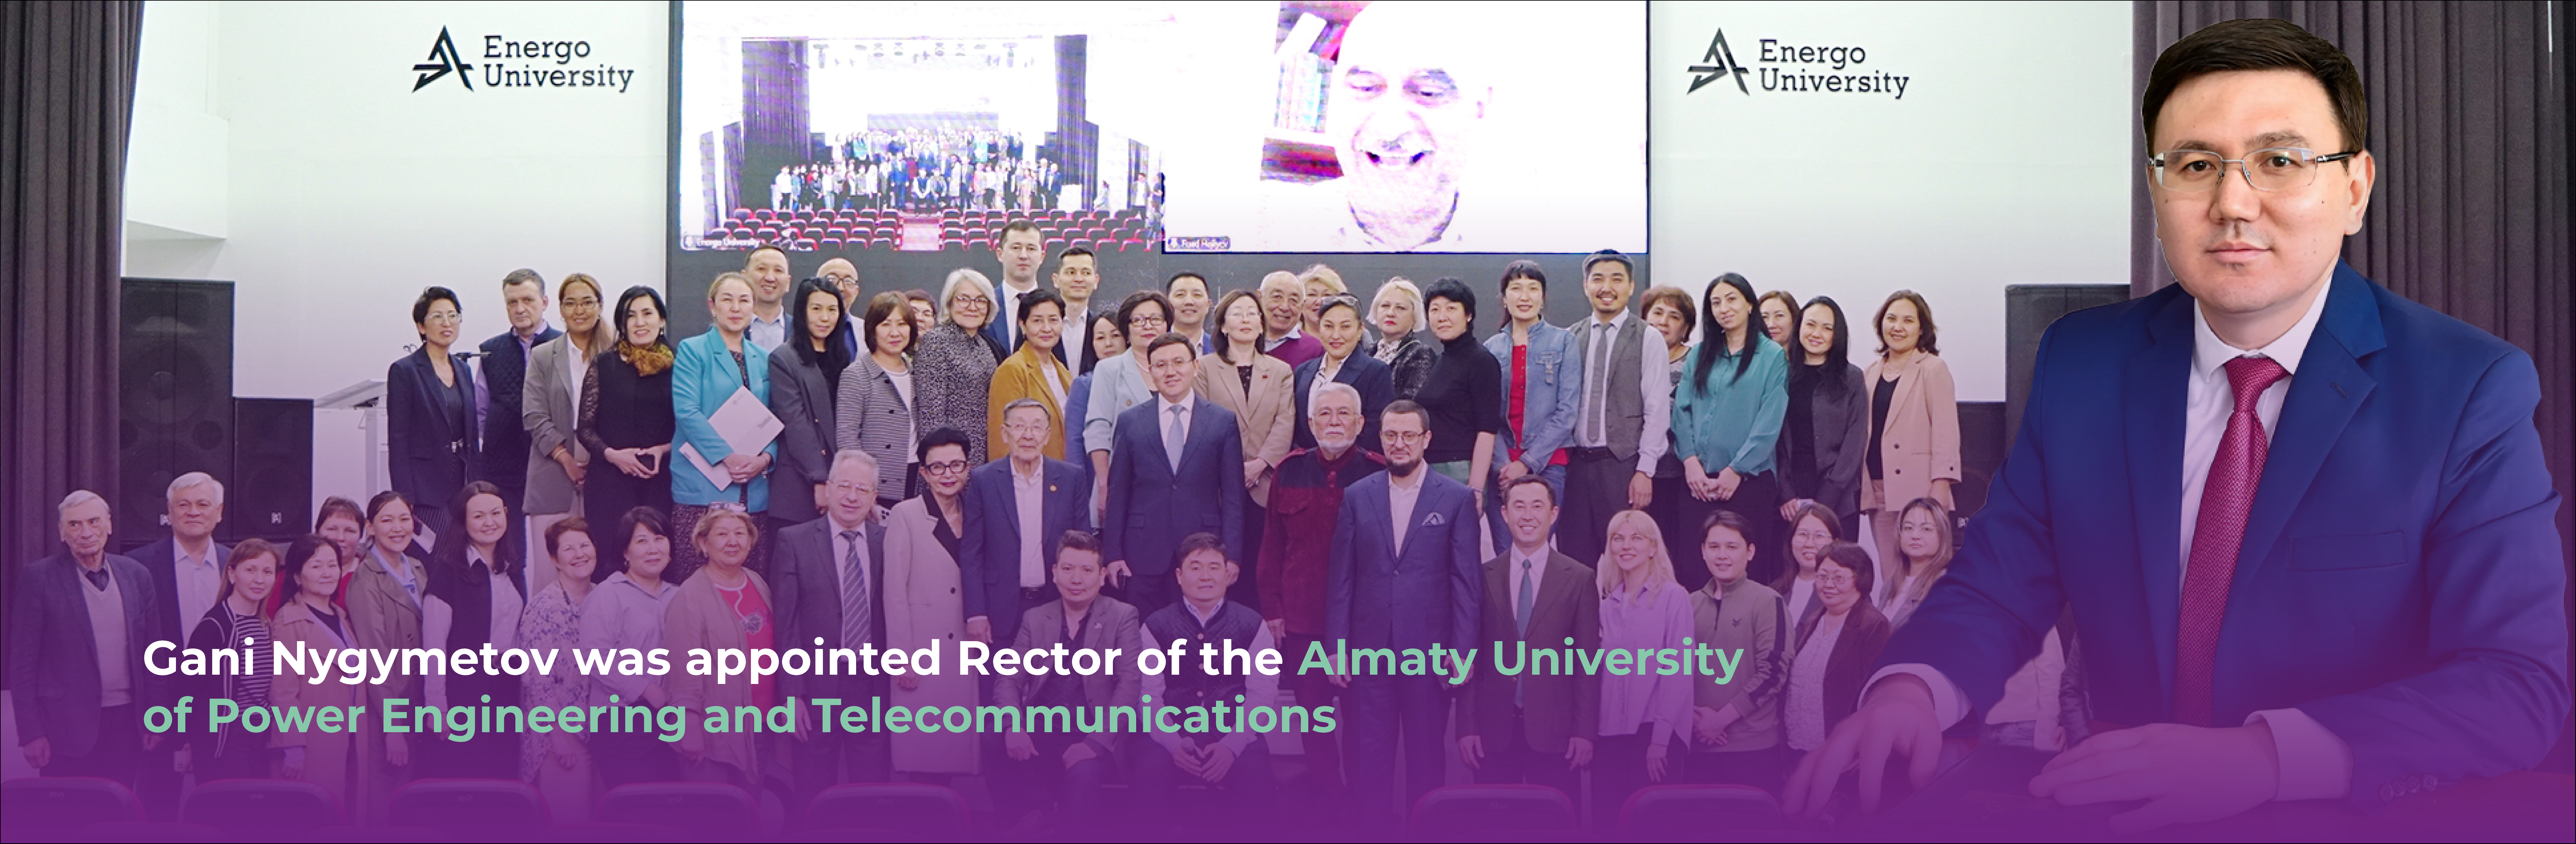 Gani Nygymetov was appointed Rector of the Almaty University of Power Engineering and Telecommunications